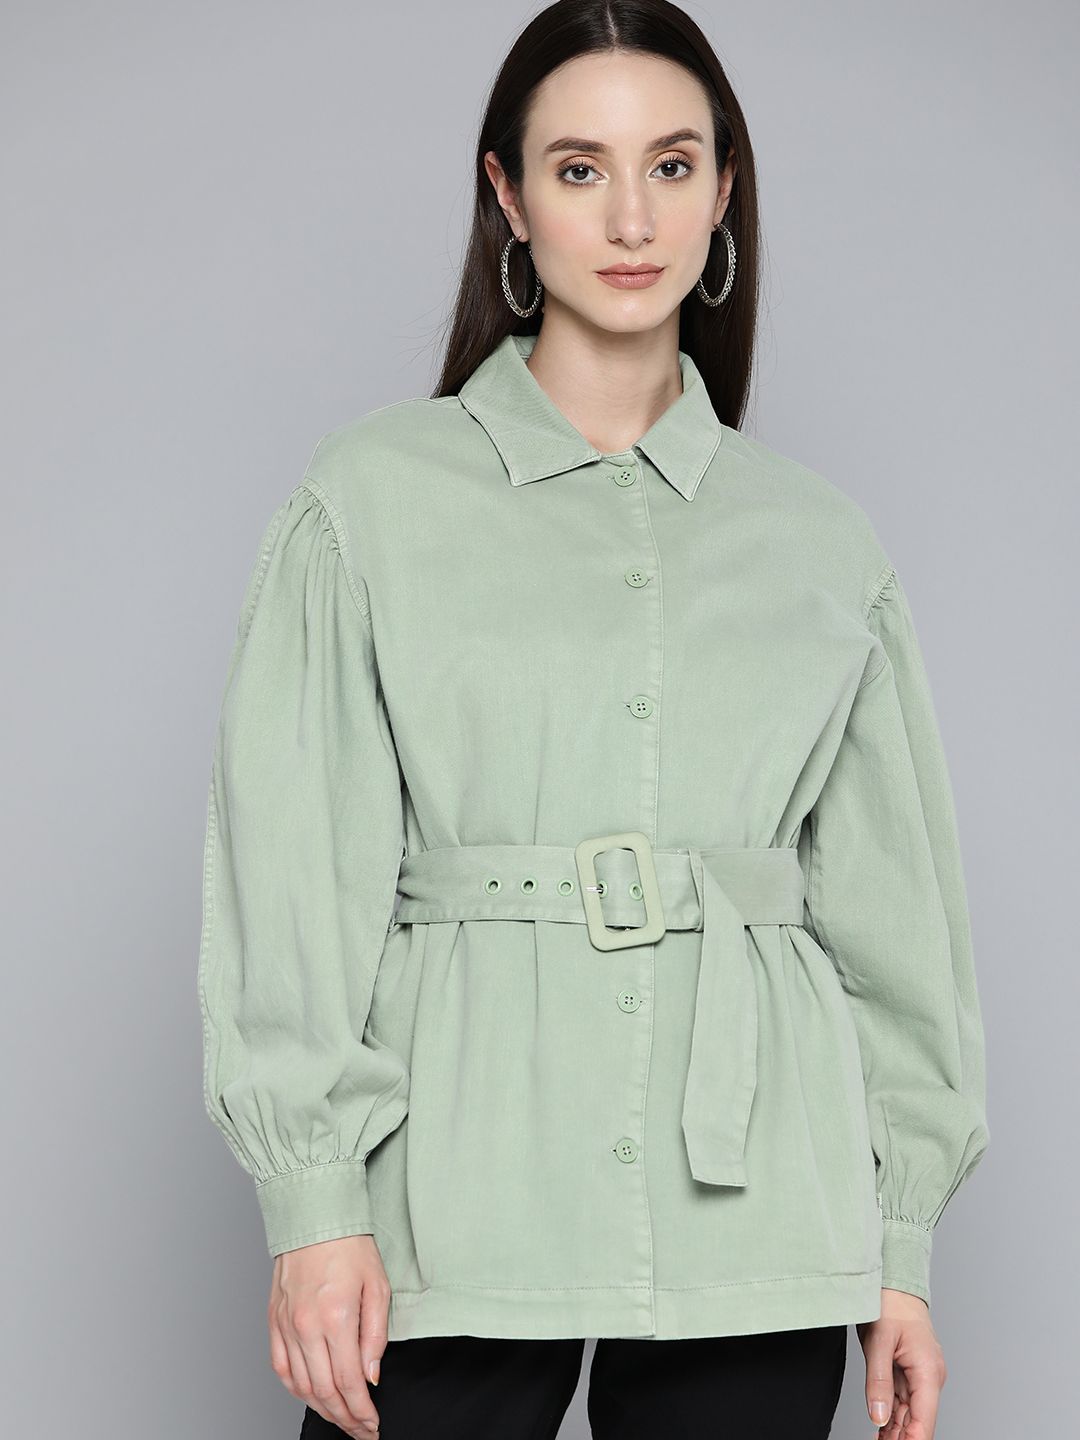 Levis X Deepika Padukone Pure Cotton Relaxed Fit Belted Puff Sleeves Shacket Price in India